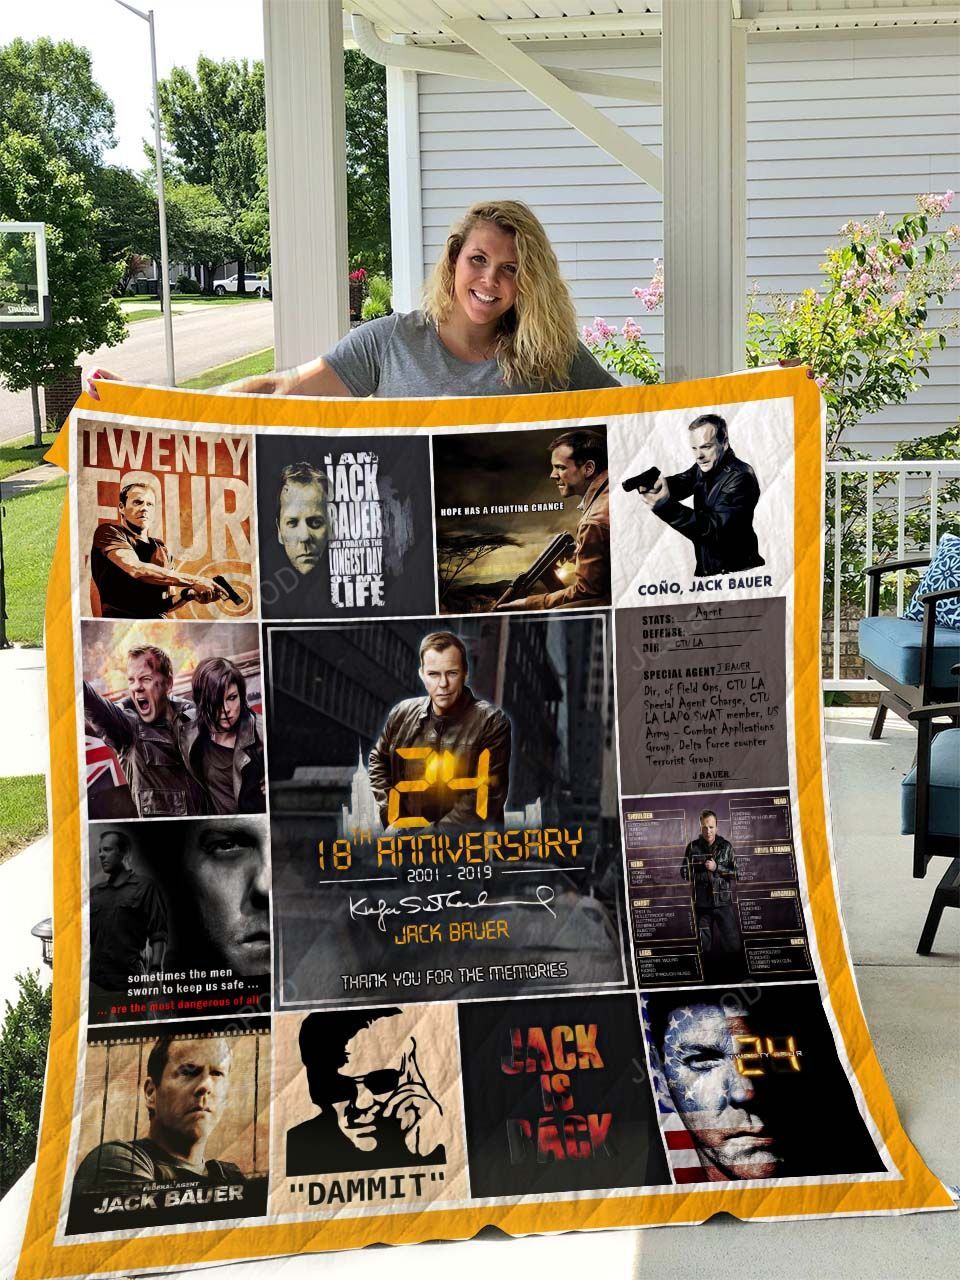 24 18th Anniversary 2001-2019 Jack Bauer Kiefer Sutherland Thank You For The Memories Signature Quilt Blanket